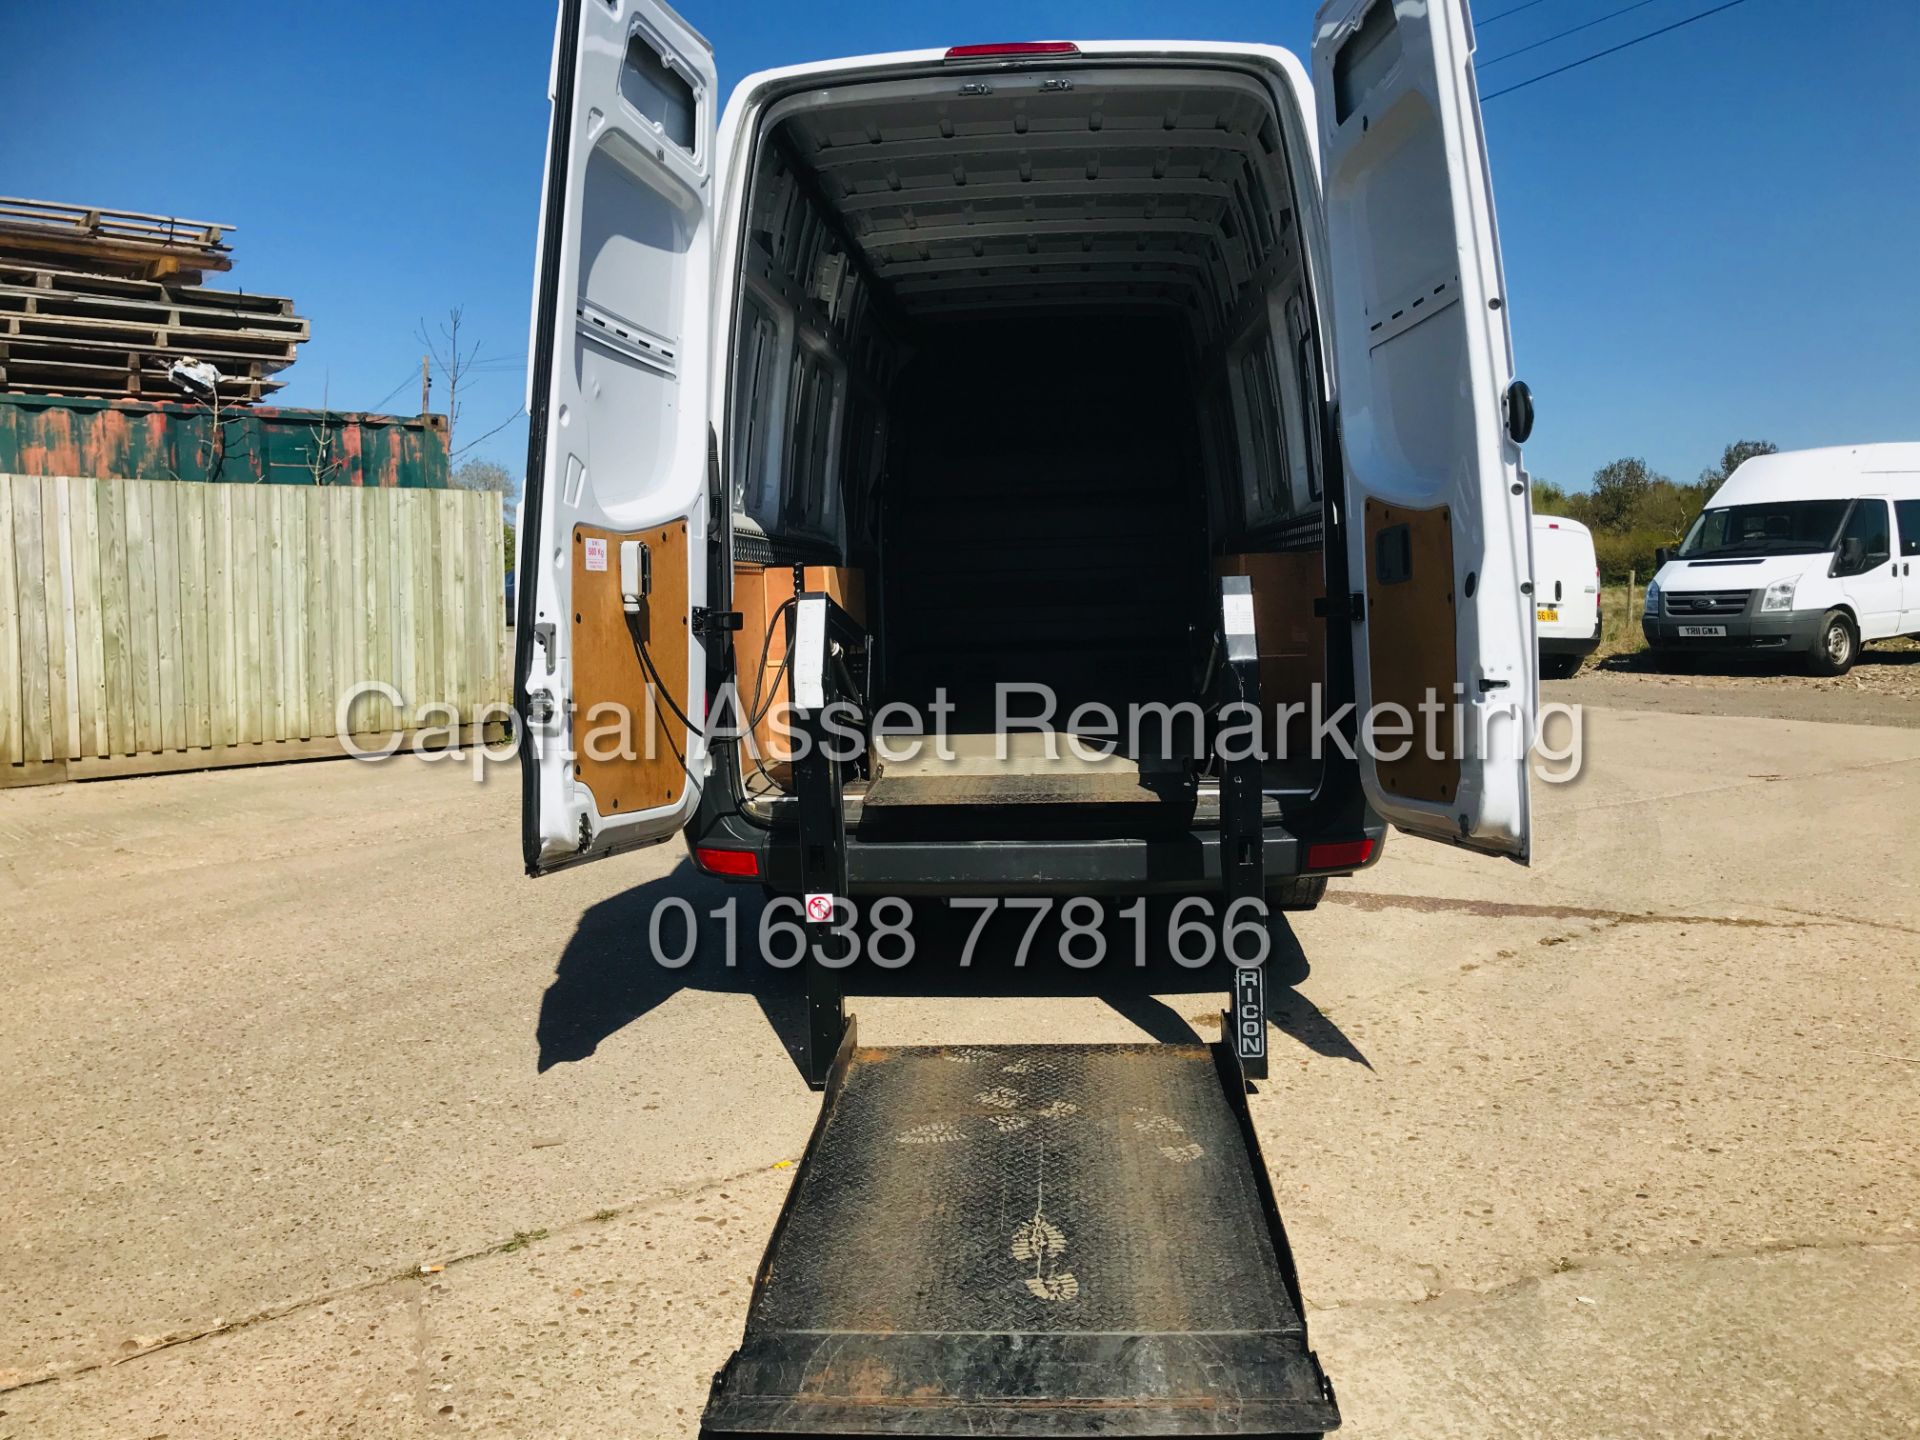 On Sale MERCEDES SPRINTER 313CDI "LWB" 4.2MTR WITH INTERNAL ELECTRIC TAIL LIFT / RAMP (16 REG) MOTOx - Image 13 of 25